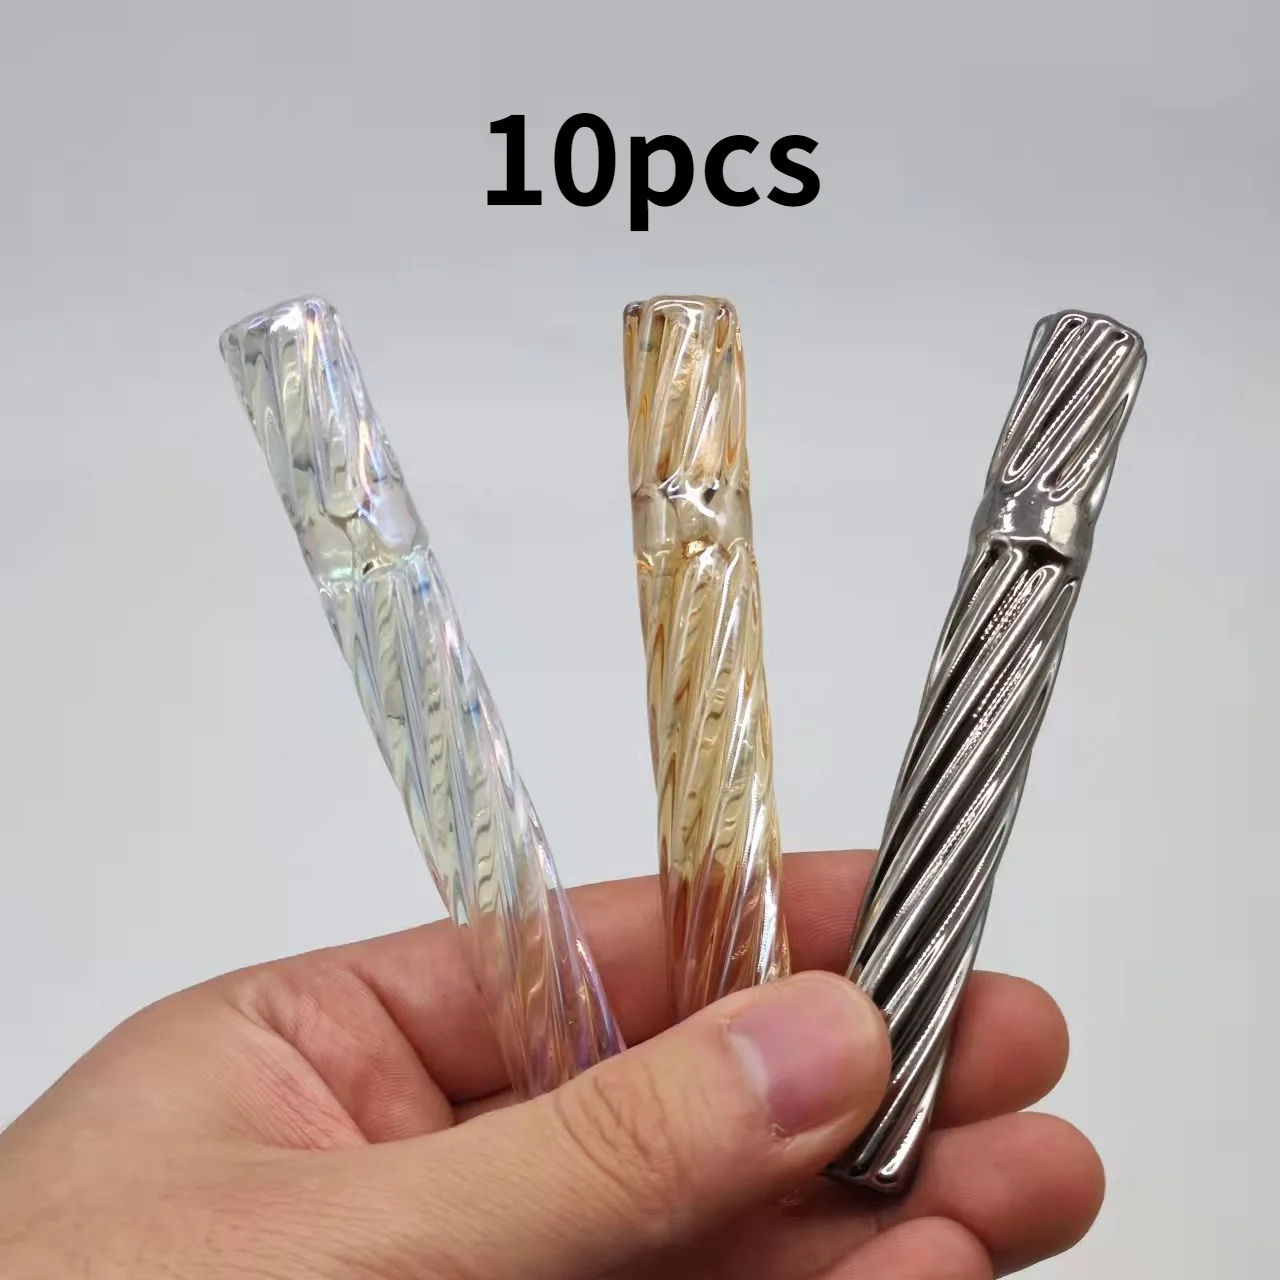 

10pcs Glass Cigarette Holder Tube For Tobacco Cigarettes Smoking Smoke Filter Pipes Mouthpiece hookah bowl Accessories